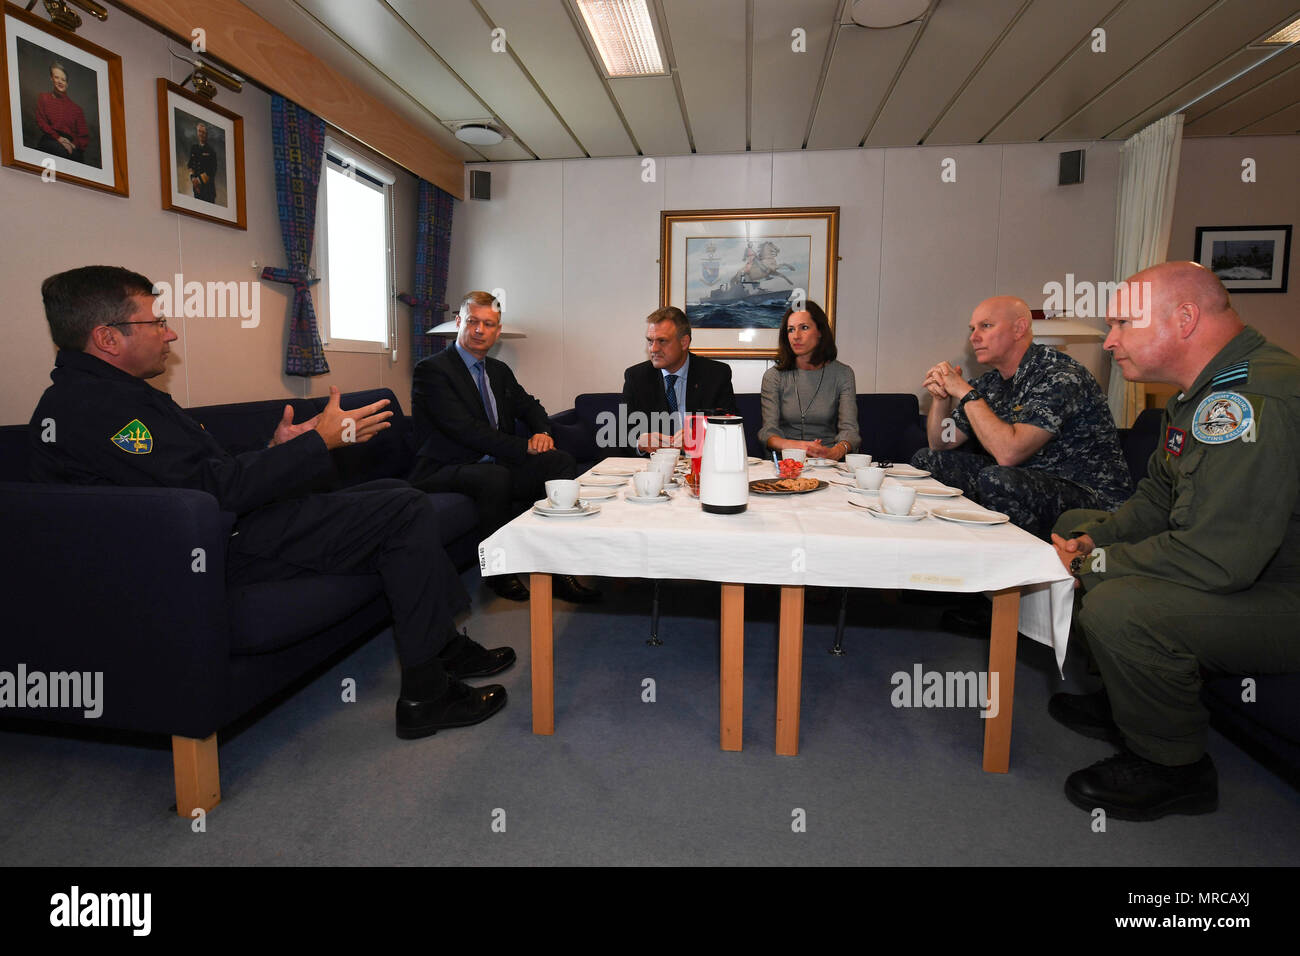 170603-N-JI086-362 - SZCZECIN, Poland (June 3, 2017) United Kingdom Rear Adm. Paddy McAlpine, Deputy Commander, Naval Striking and Support Forces NATO, right, gives remarks during an office call with the Governor of Szczecin aboard the Danish Absalon-class combat support ship HDMS Absalon (L16), June 3, 2017. BALTOPS is an annual U.S.-led, Naval Striking and Support Forces NATO-executed, multinational maritime exercise in the Baltic Sea region designed to enhance flexibility and interoperability among its participants. (U.S. Navy photo by Mass Communication Specialist 3rd Class Ford Williams/R Stock Photo